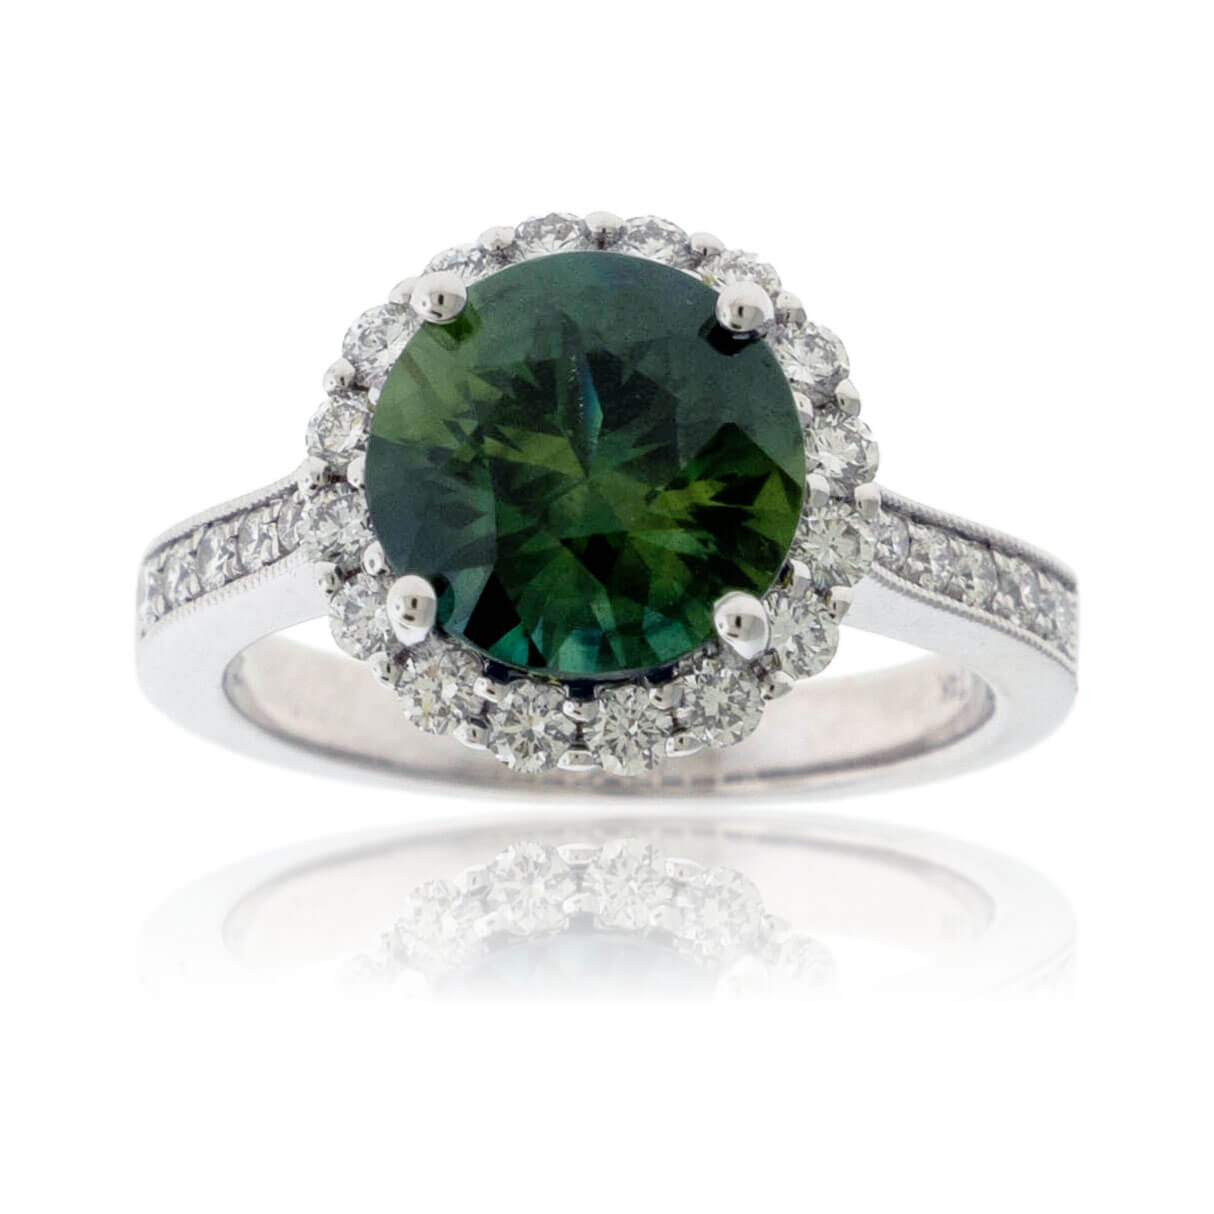 Antique Style Green Sapphire Engagement Ring, RG-3169d